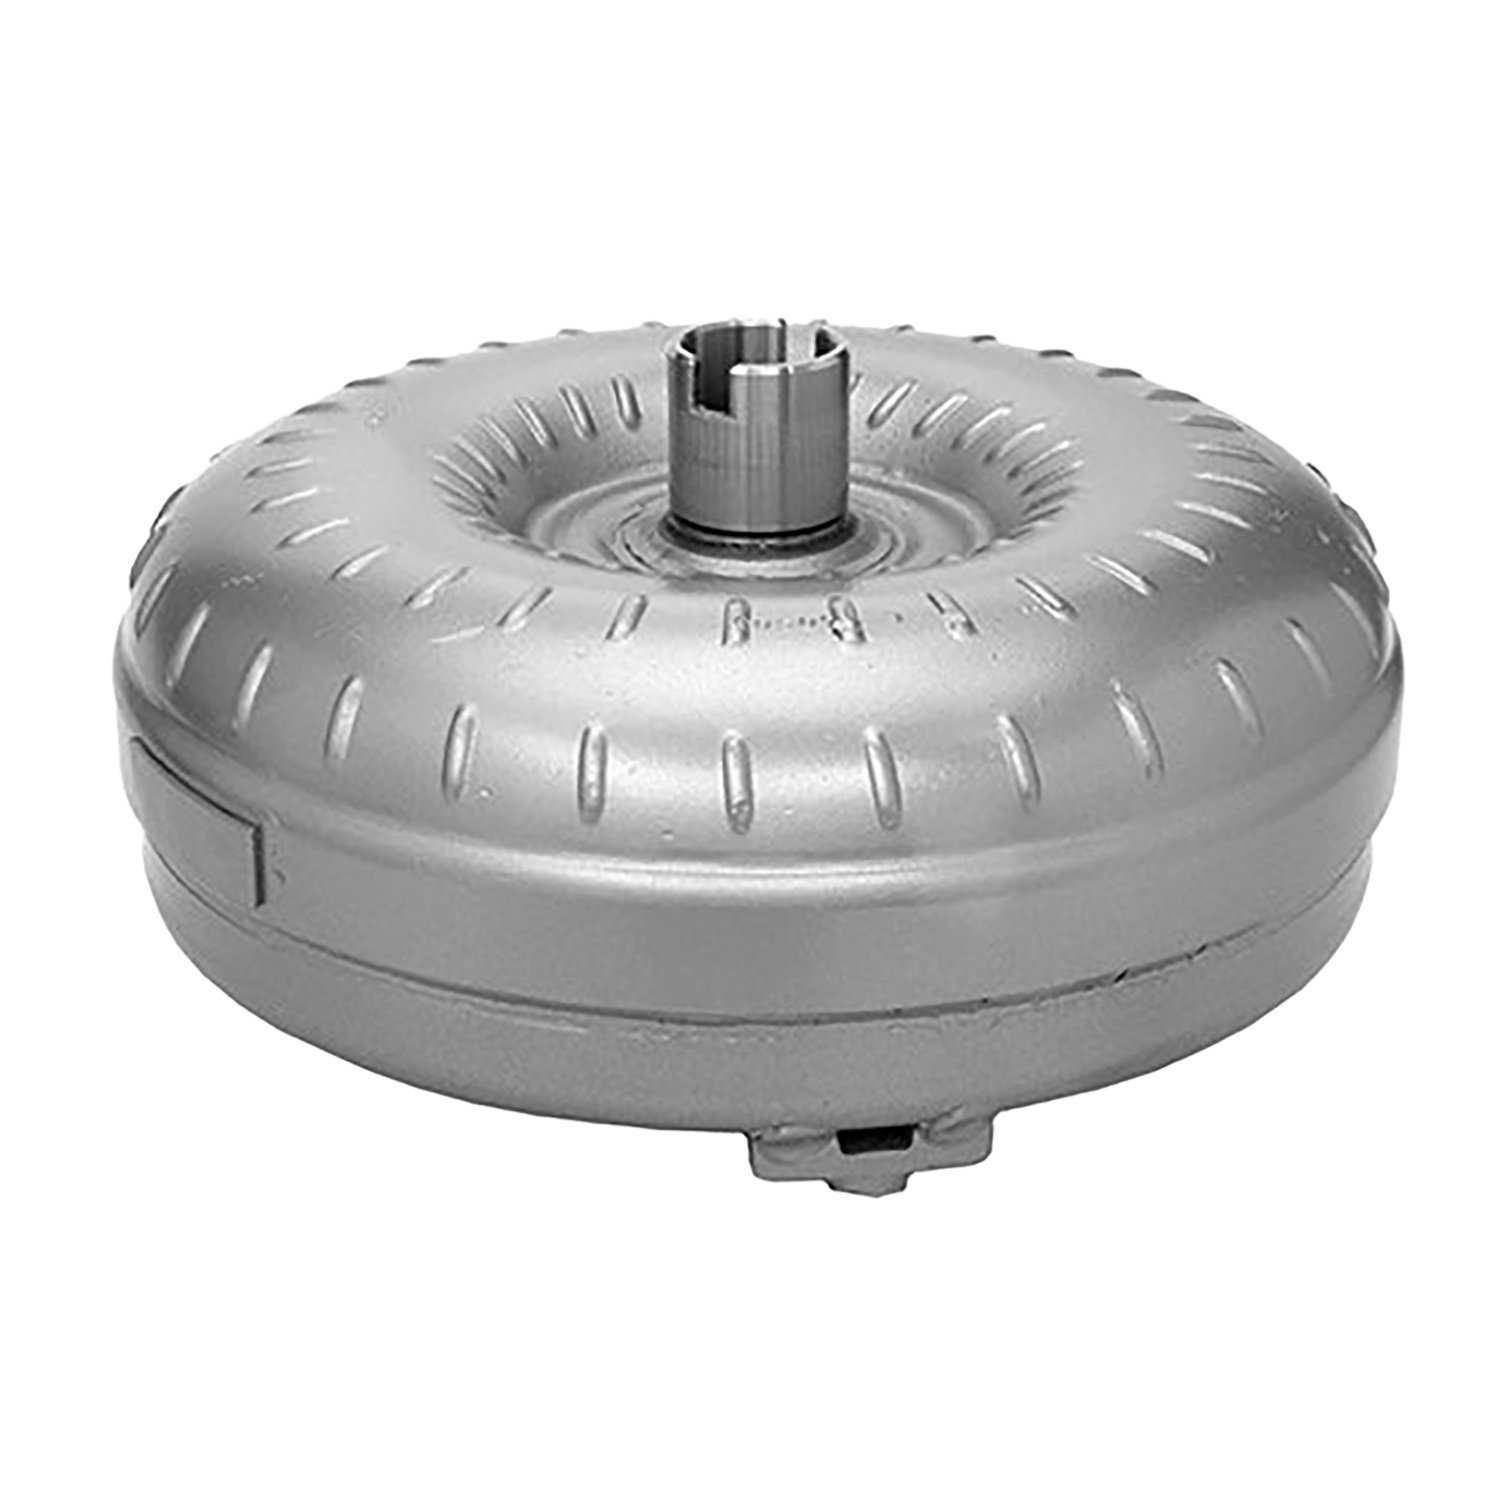 Remanufactured Automatic Transmission Torque Converter for GM TH700R4/4L60 No Cltch HS FB